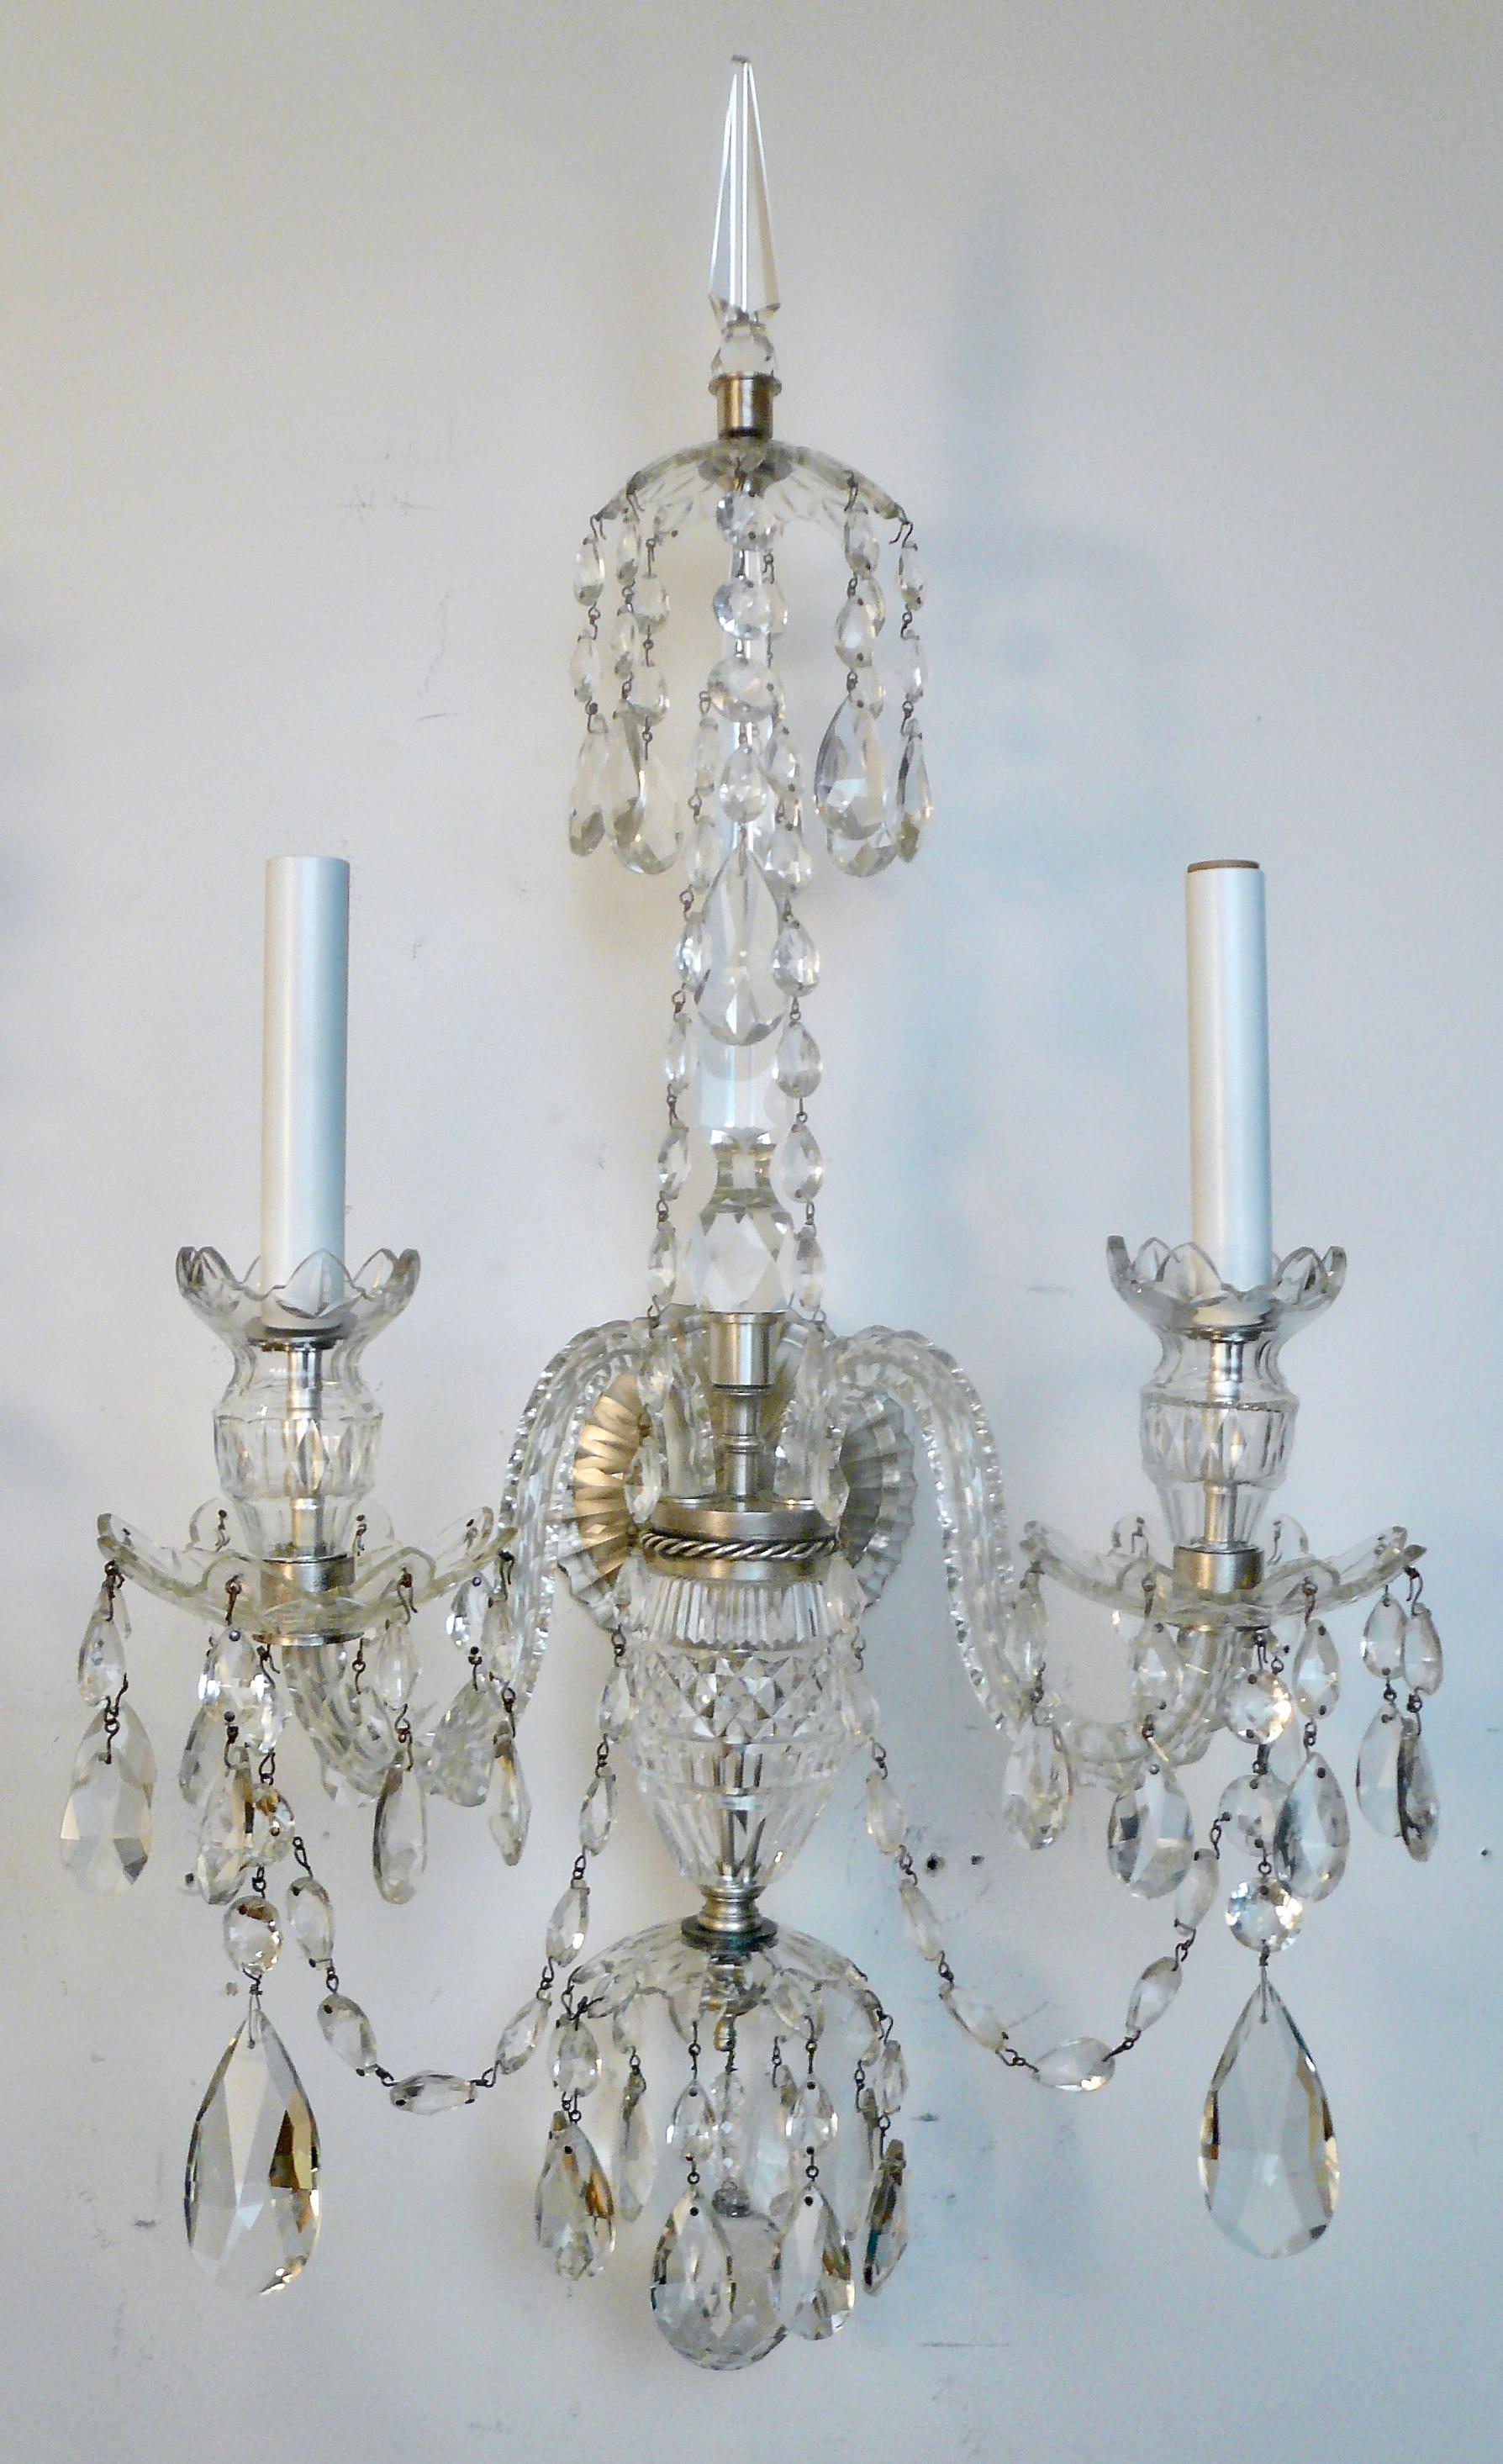 Silver Plate A Grand Scale Pair Cut Crystal Georgian Design Sconces in the Waterford Style For Sale